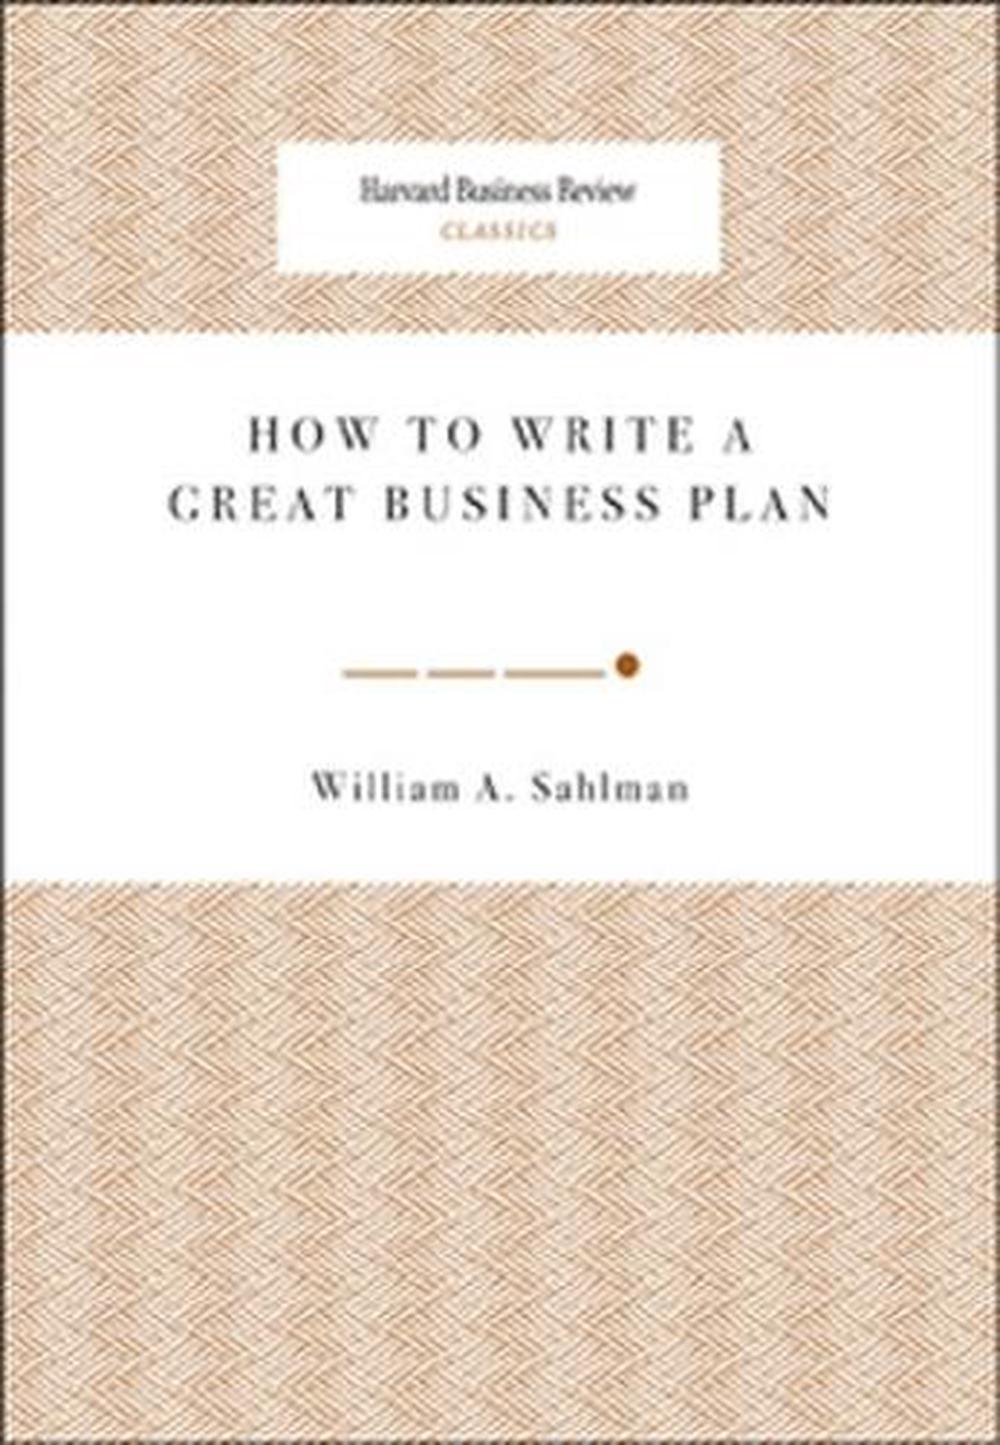 how to write a great business plan by william sahlman